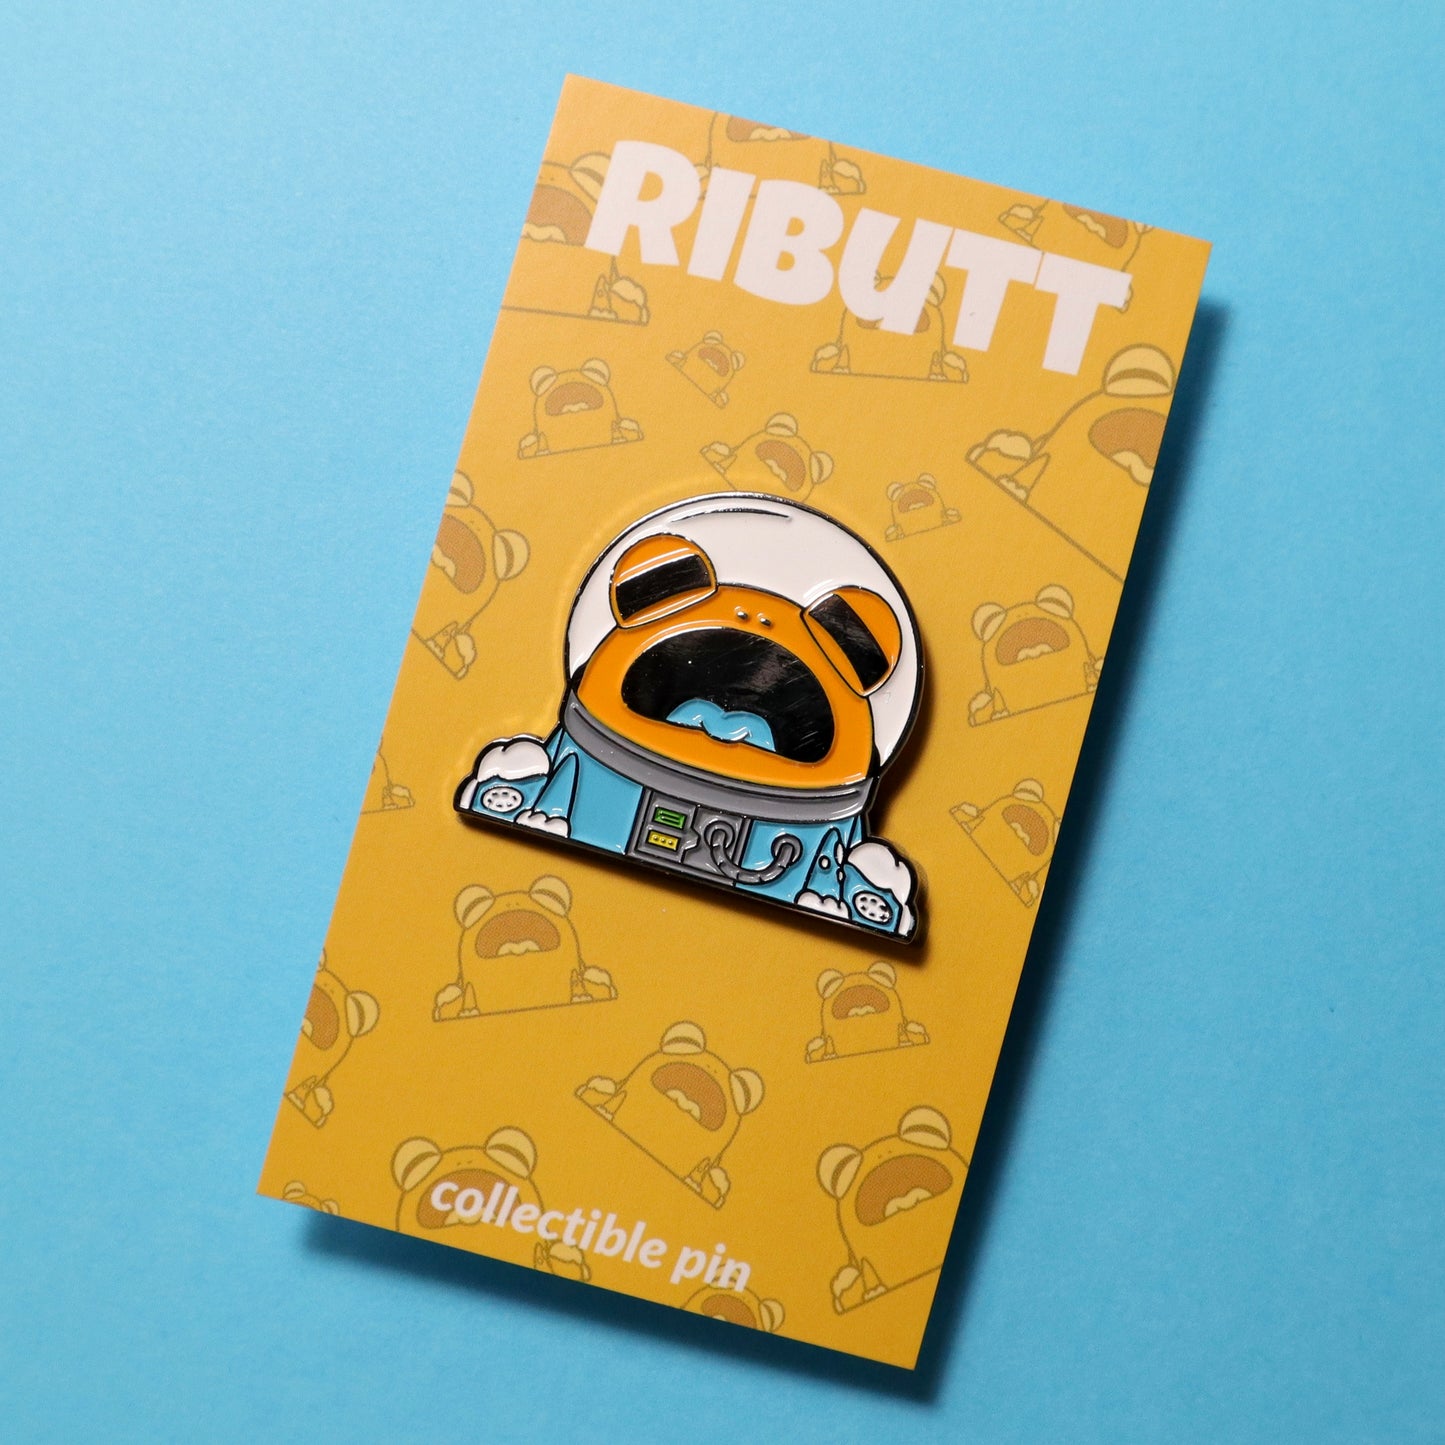 Astro Frog (Blue Suit) - Ributt the Frog Enamel Pin